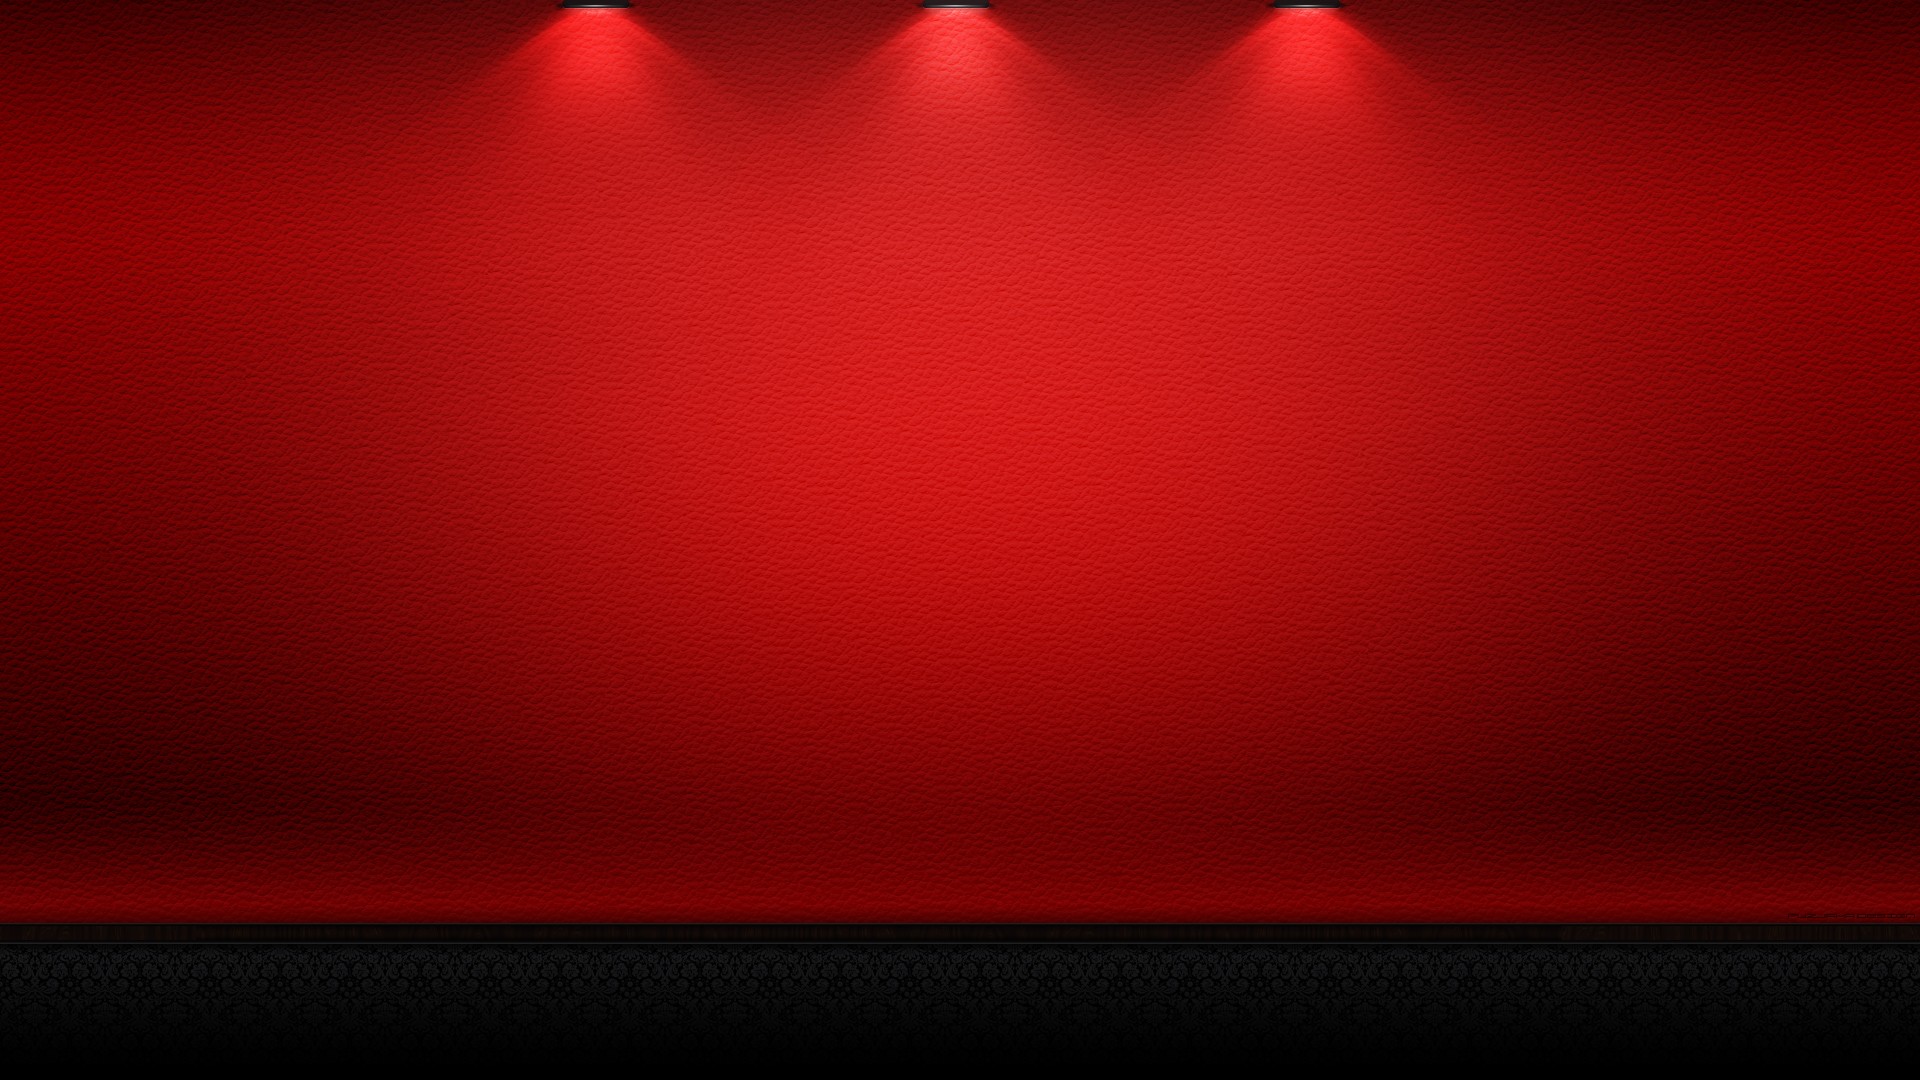 171 Red HD Wallpapers | Backgrounds - Wallpaper Abyss - Page 5